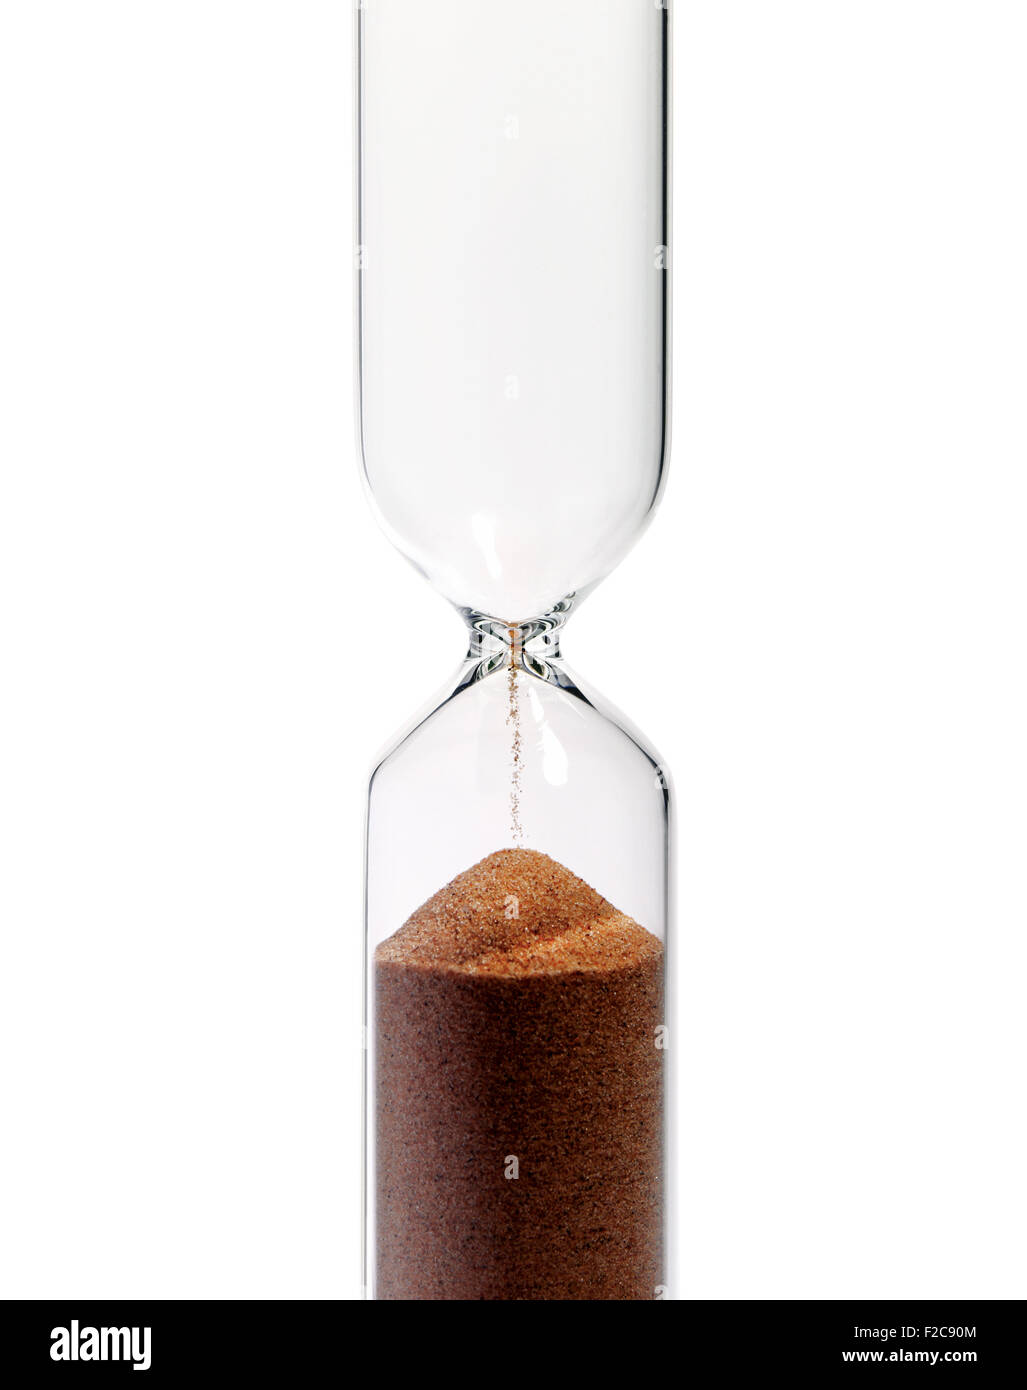 A vertical hourglass, isolated on white background, showing that the time has passed. Stock Photo